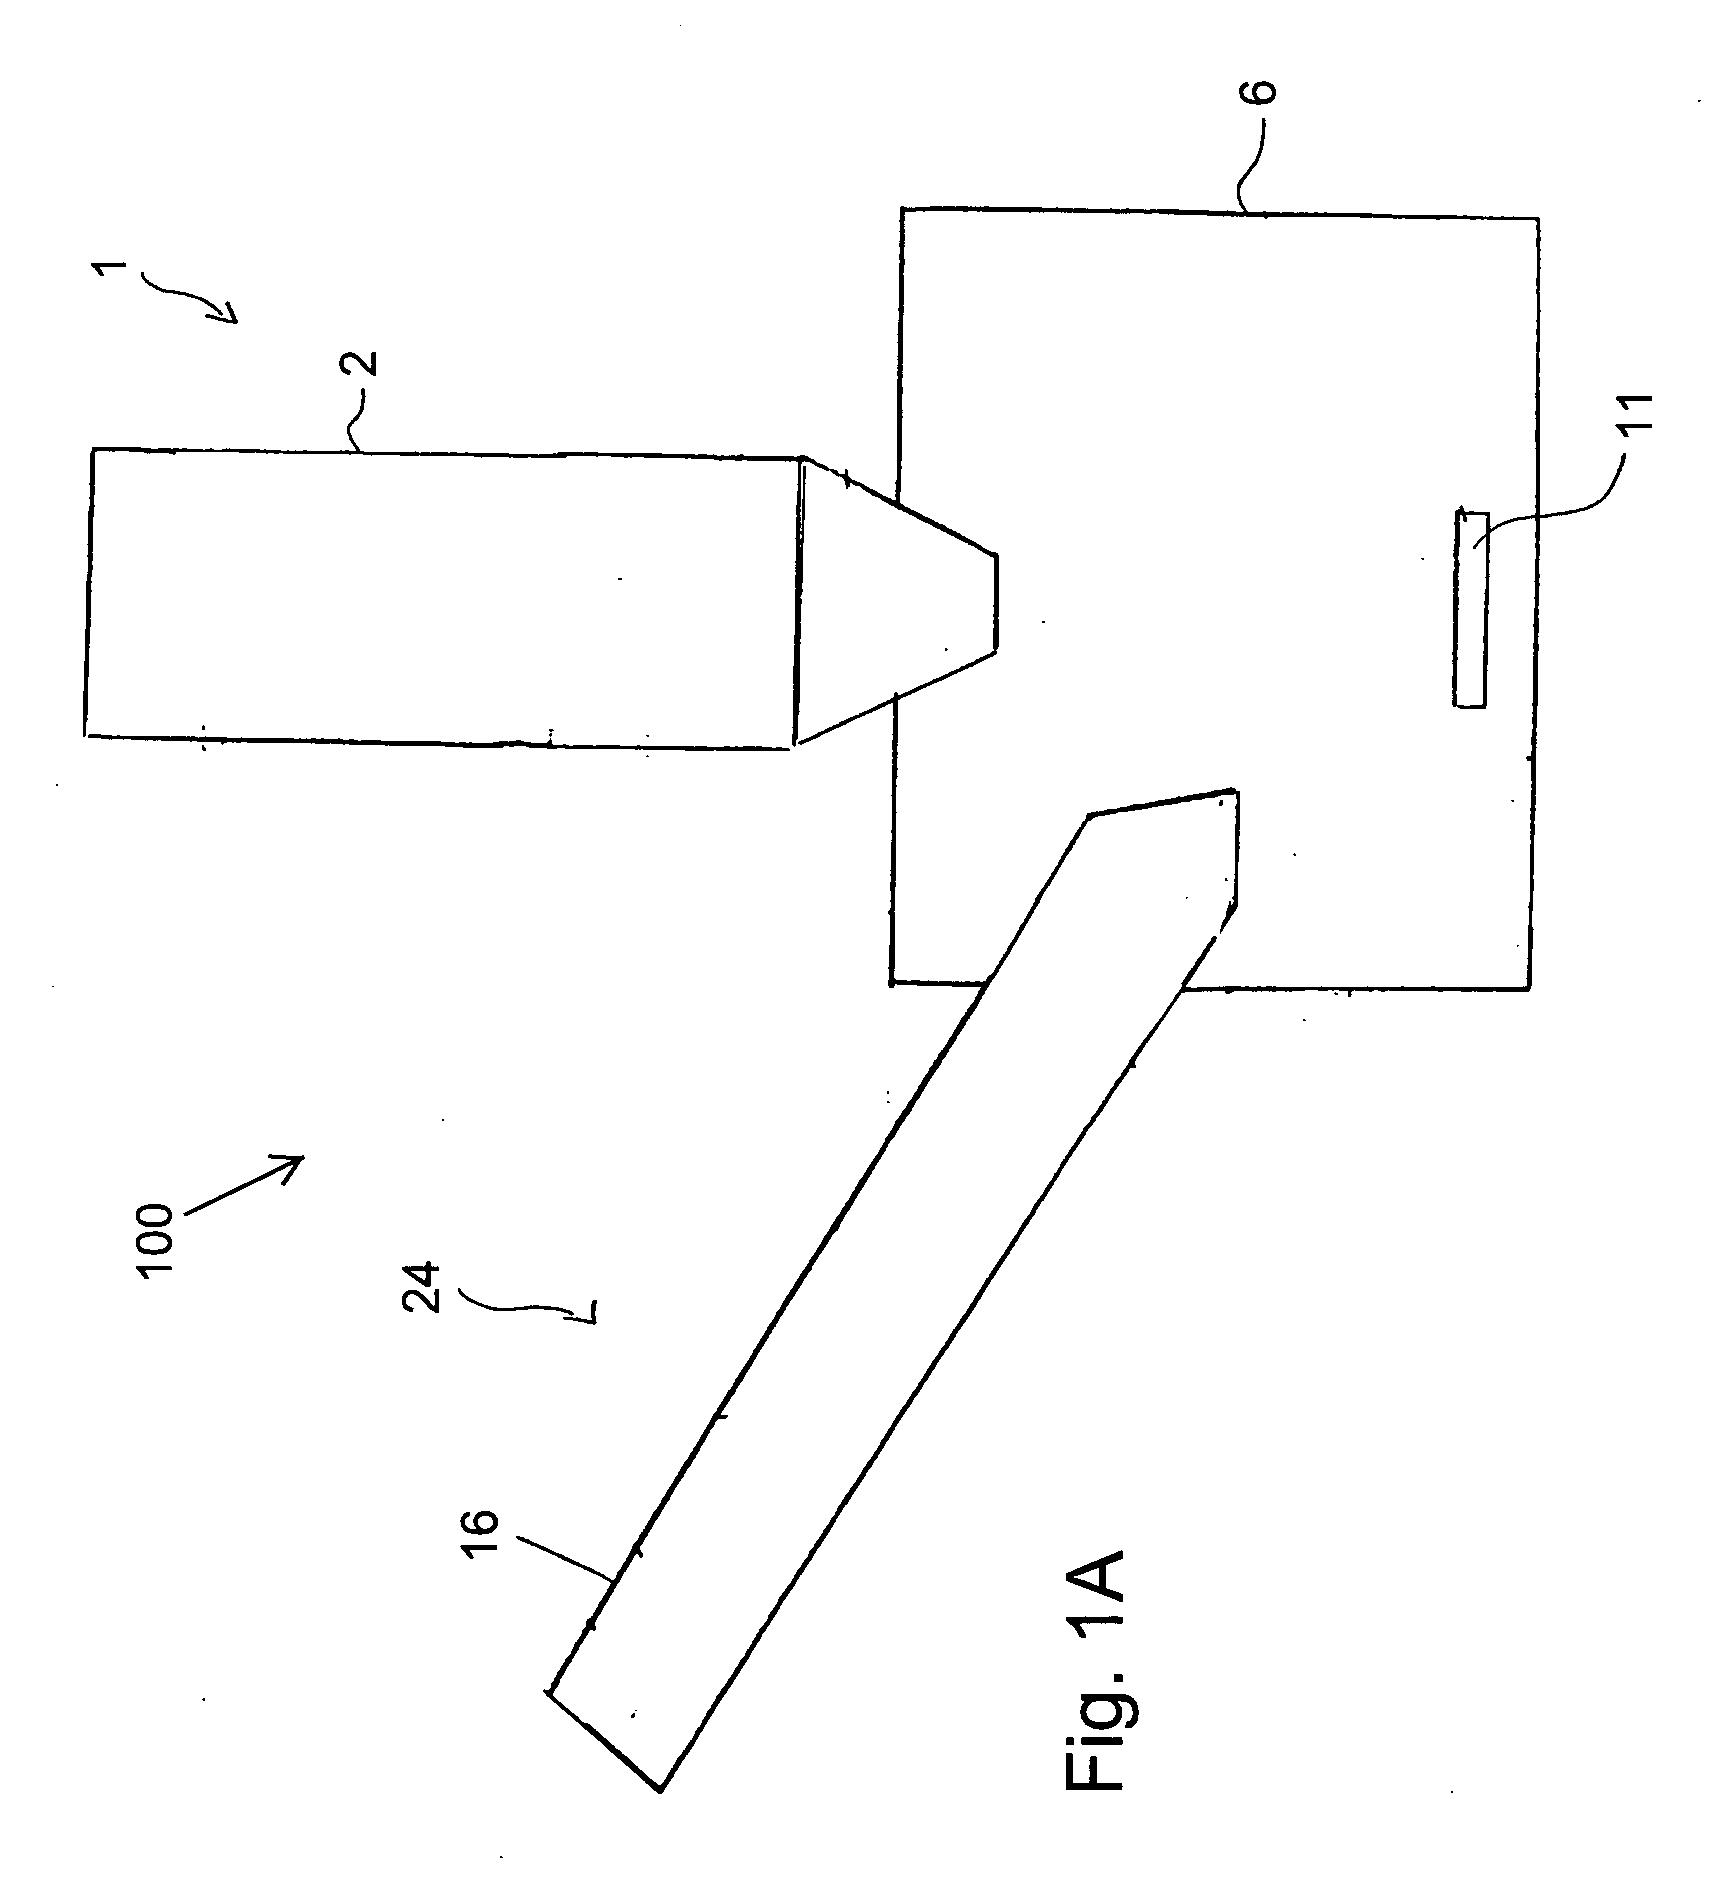 Device and method for analyzing a sample